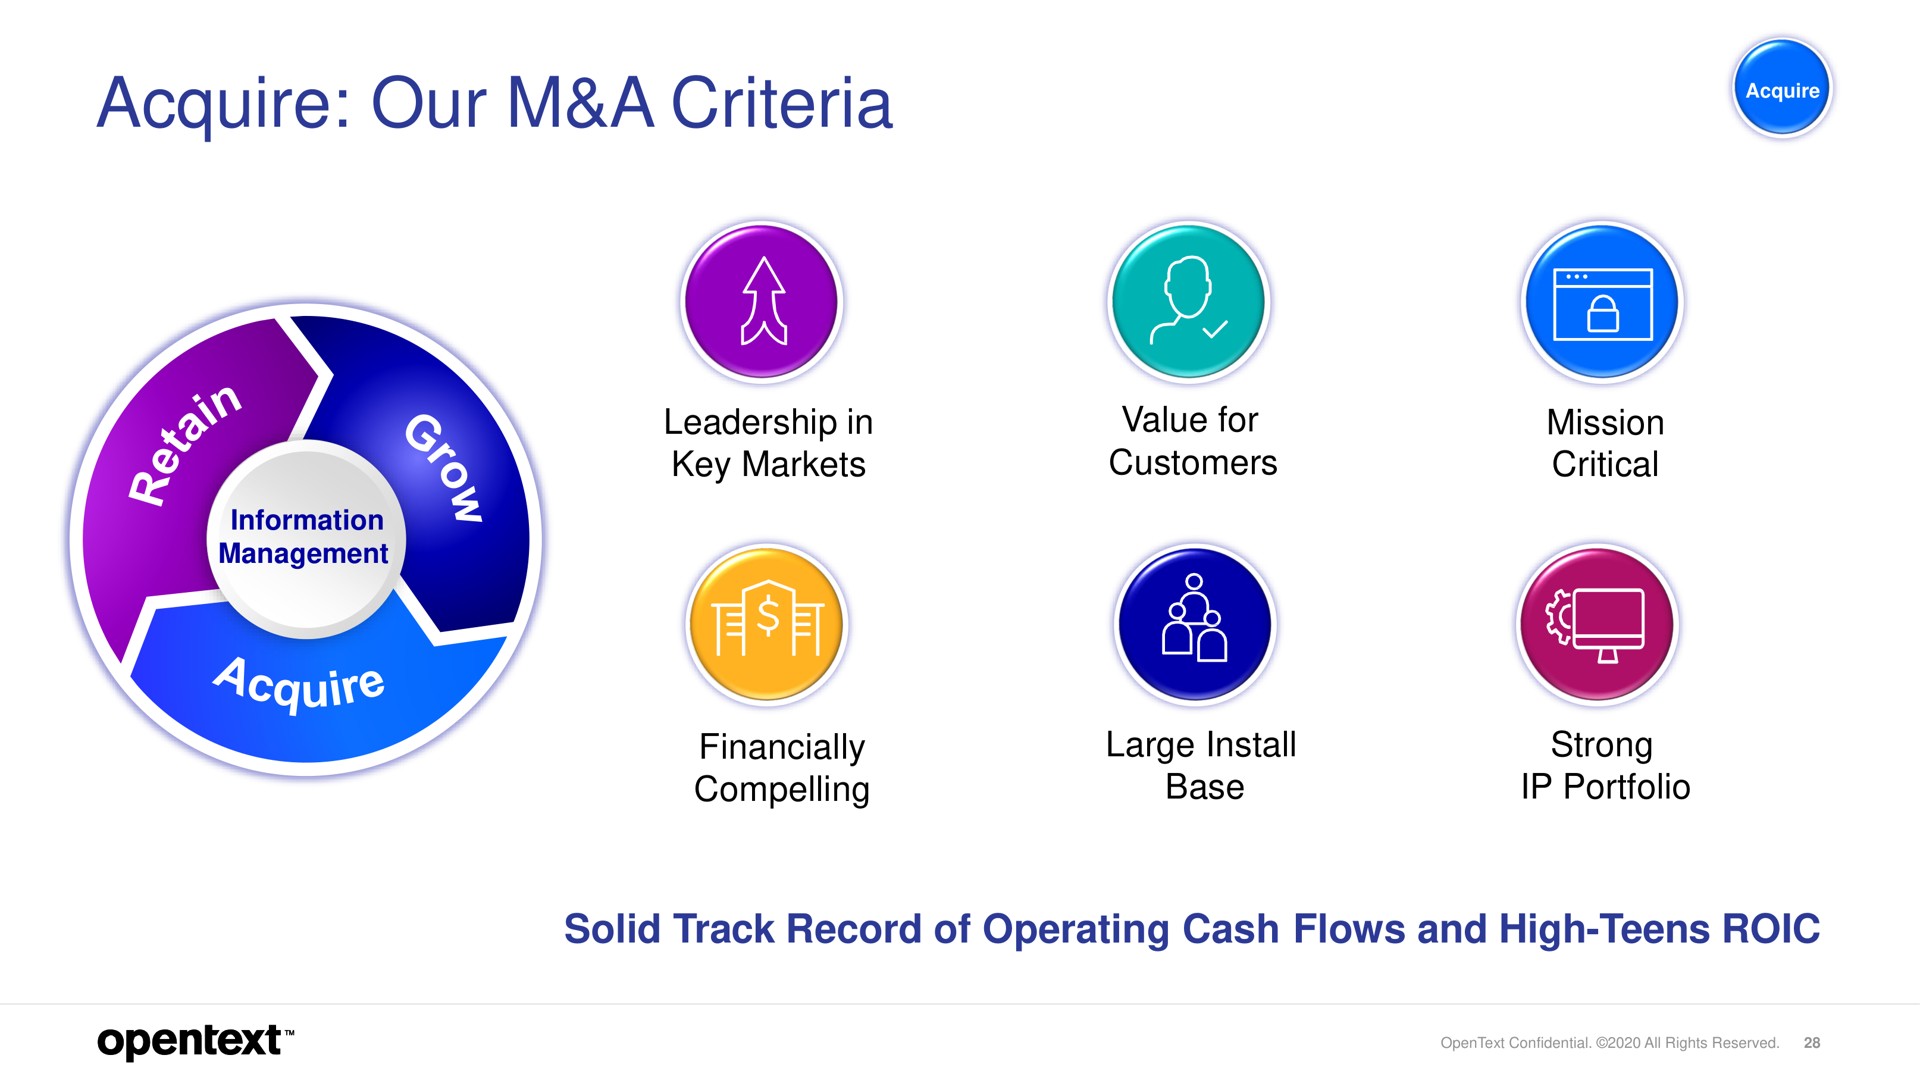 acquire our a criteria | OpenText